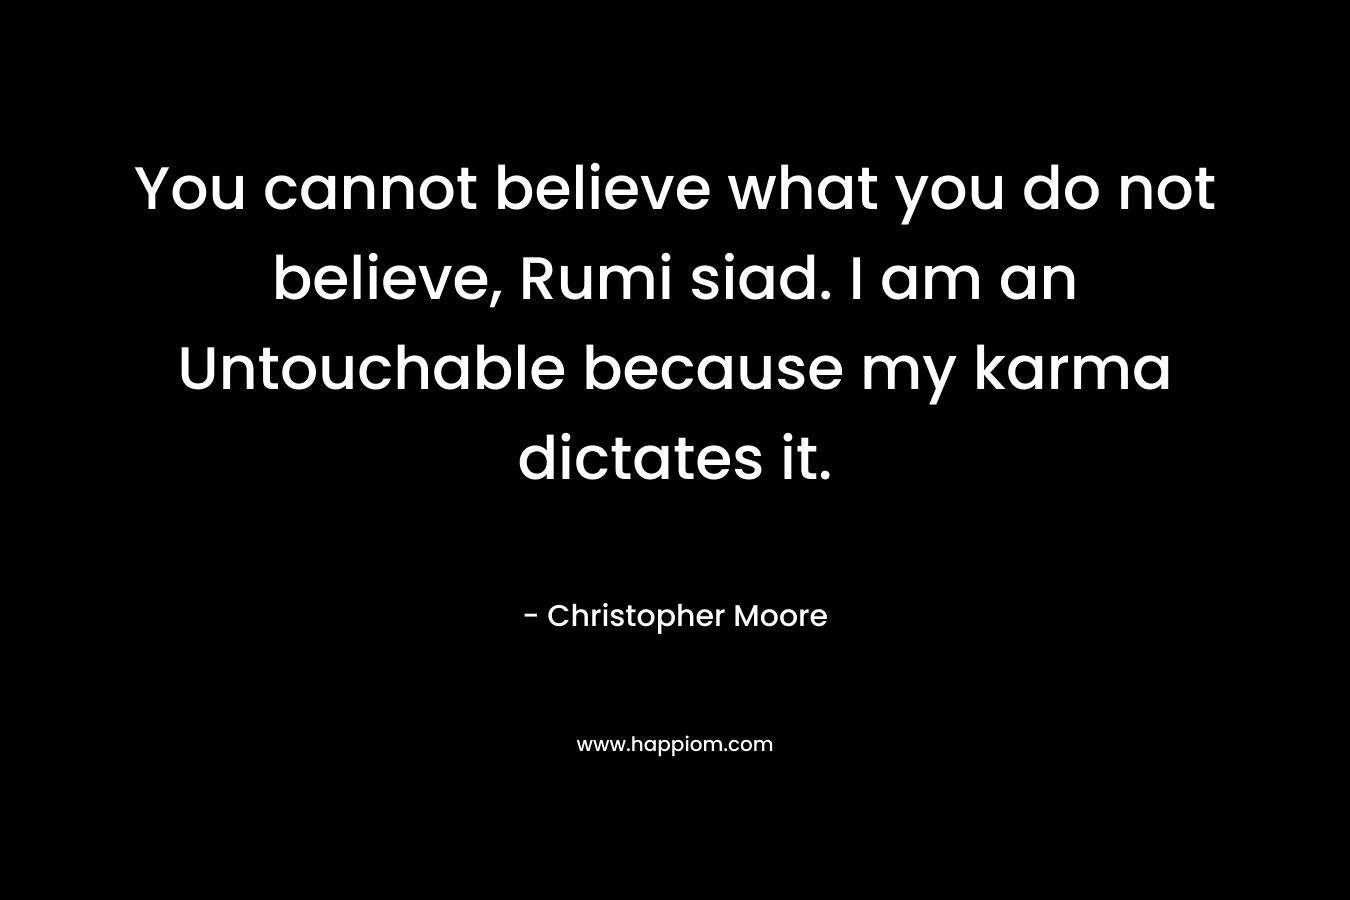 You cannot believe what you do not believe, Rumi siad. I am an Untouchable because my karma dictates it. – Christopher Moore